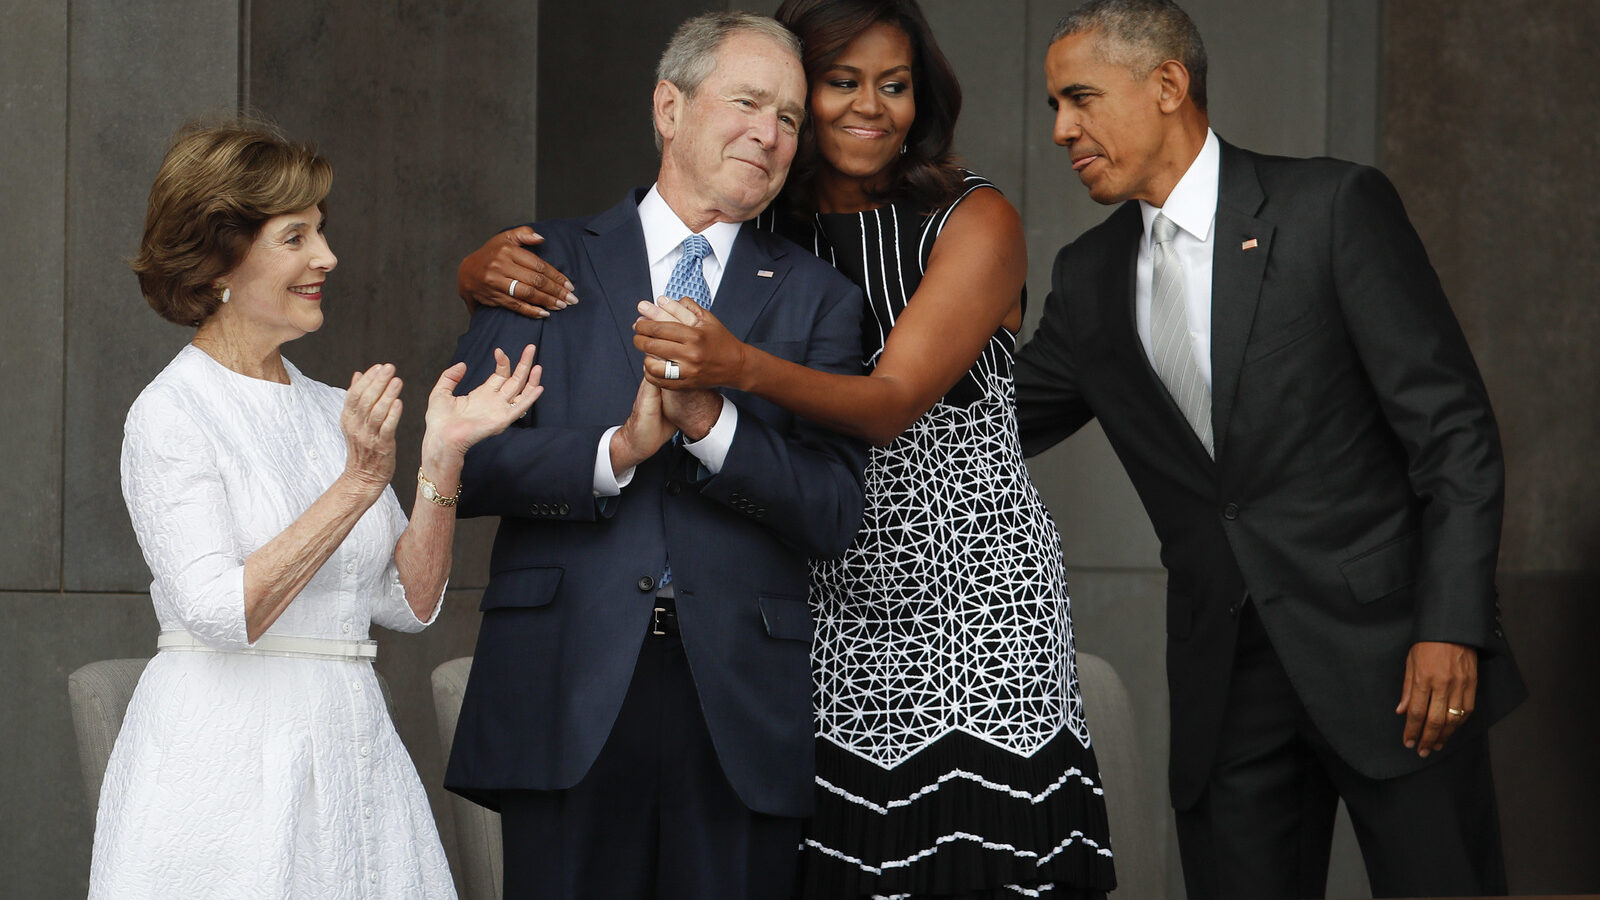 First lady Michelle Obama, center, hugs former President George W. Bush, as President Barack Obama and former first lady Laura Bush walk on stage at the dedication ceremony of the Smithsonian Museum of African American History and Culture on the National Mall in Washington, Saturday, Sept. 24, 2016. (AP/Pablo Martinez Monsivais)